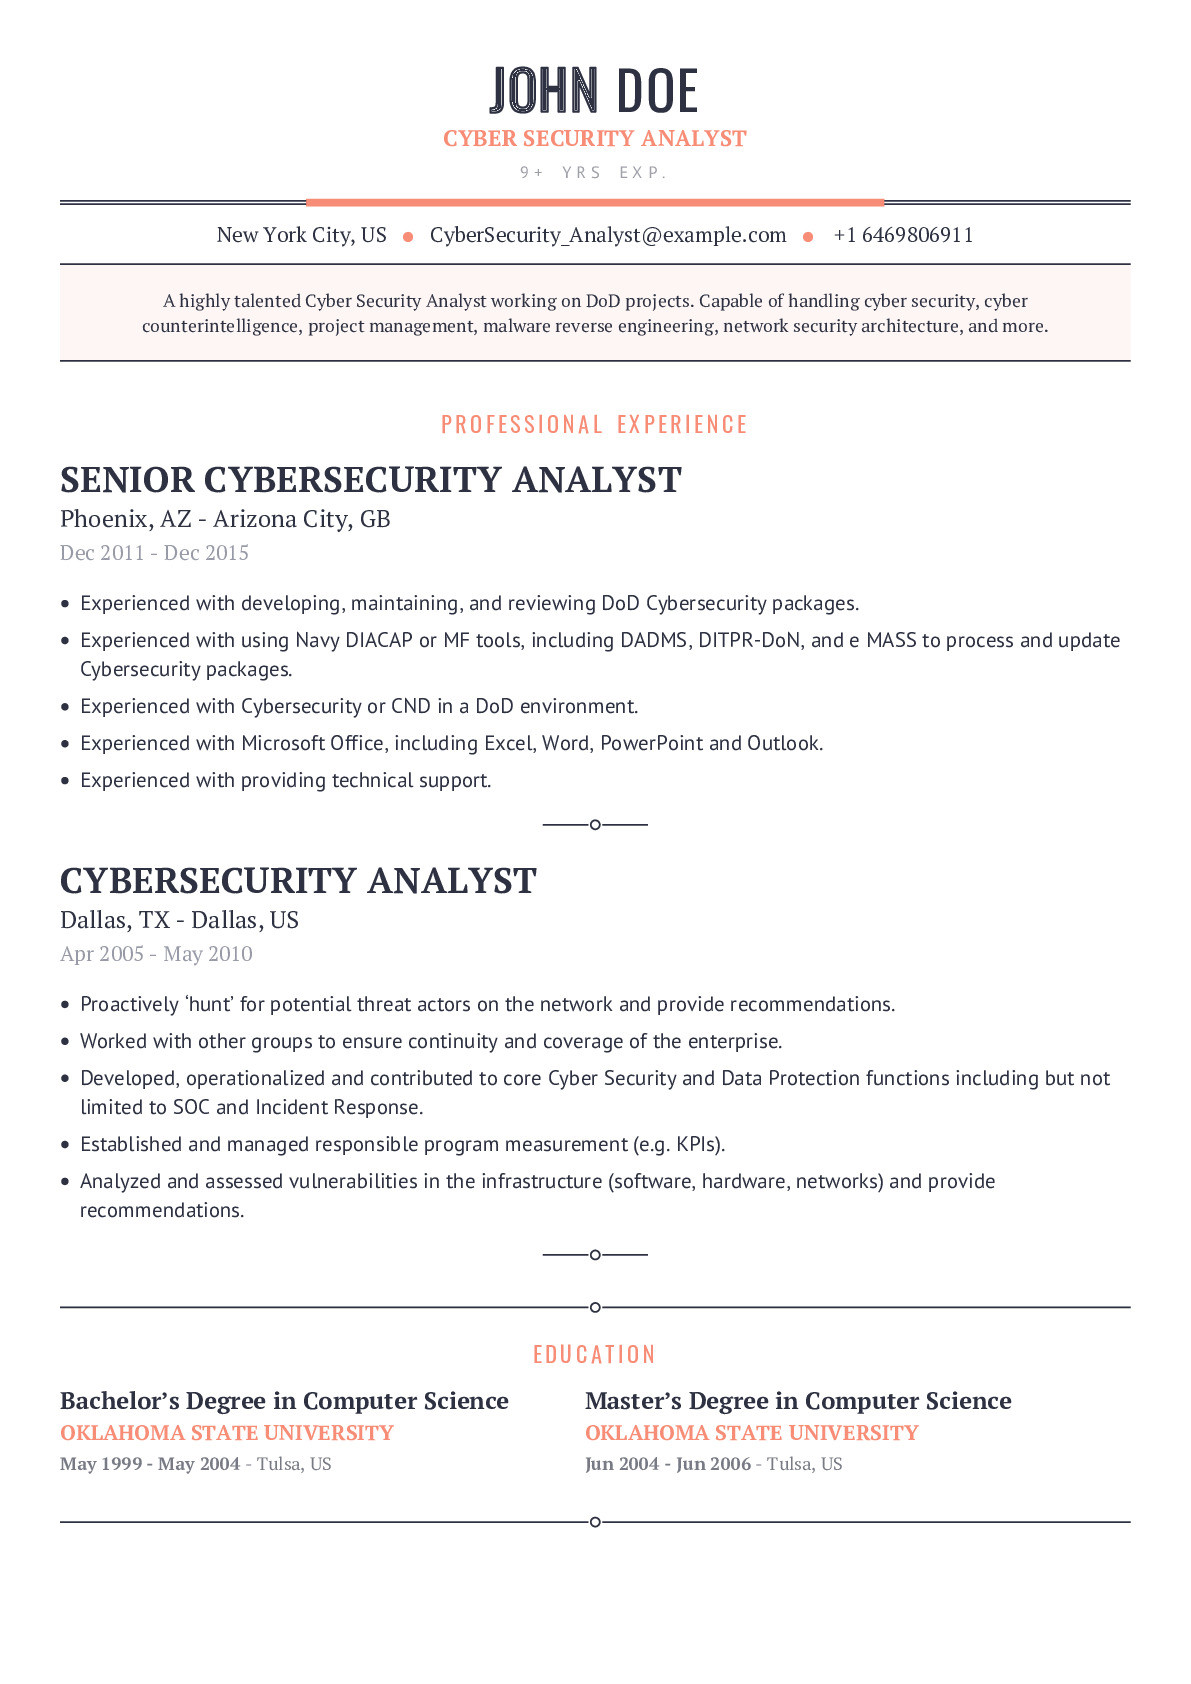 Sample Resume for It Security Analyst Cyber Security Analyst Resume Example with Content Sample Craftmycv